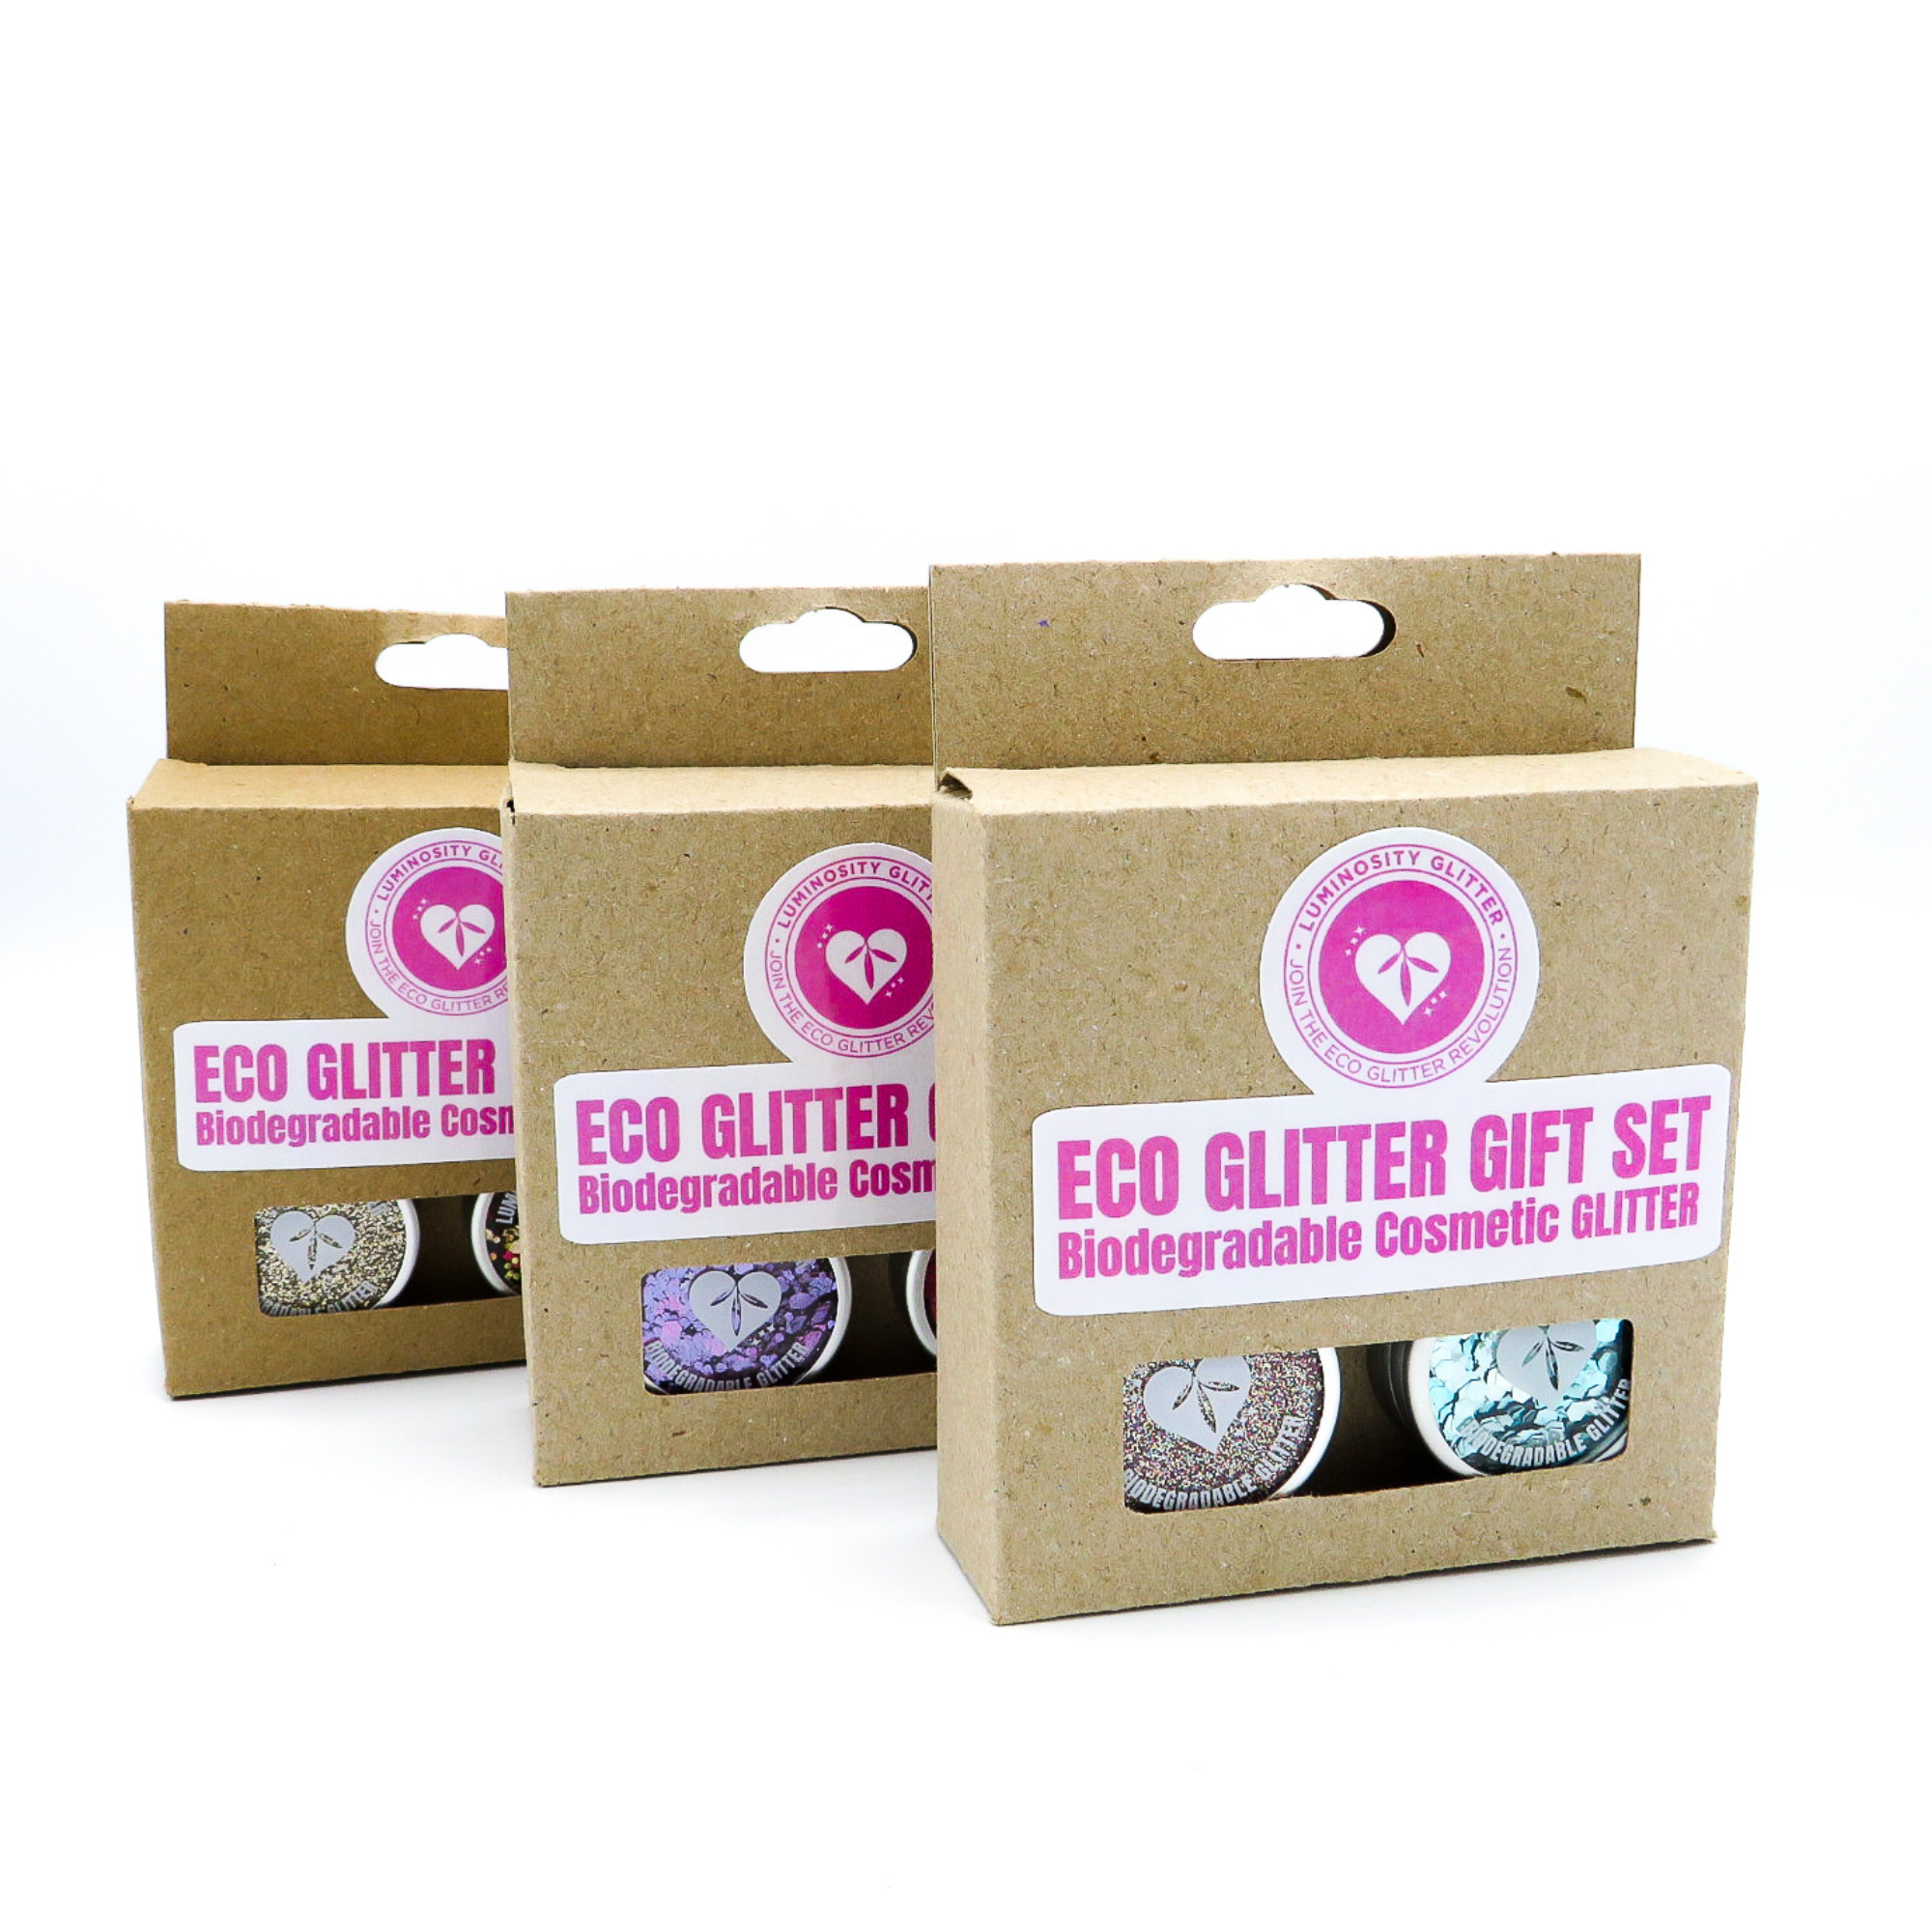 Eco glitter gift set in a Kraft card box by Luminosity glitter as part of their Christmas gifting section